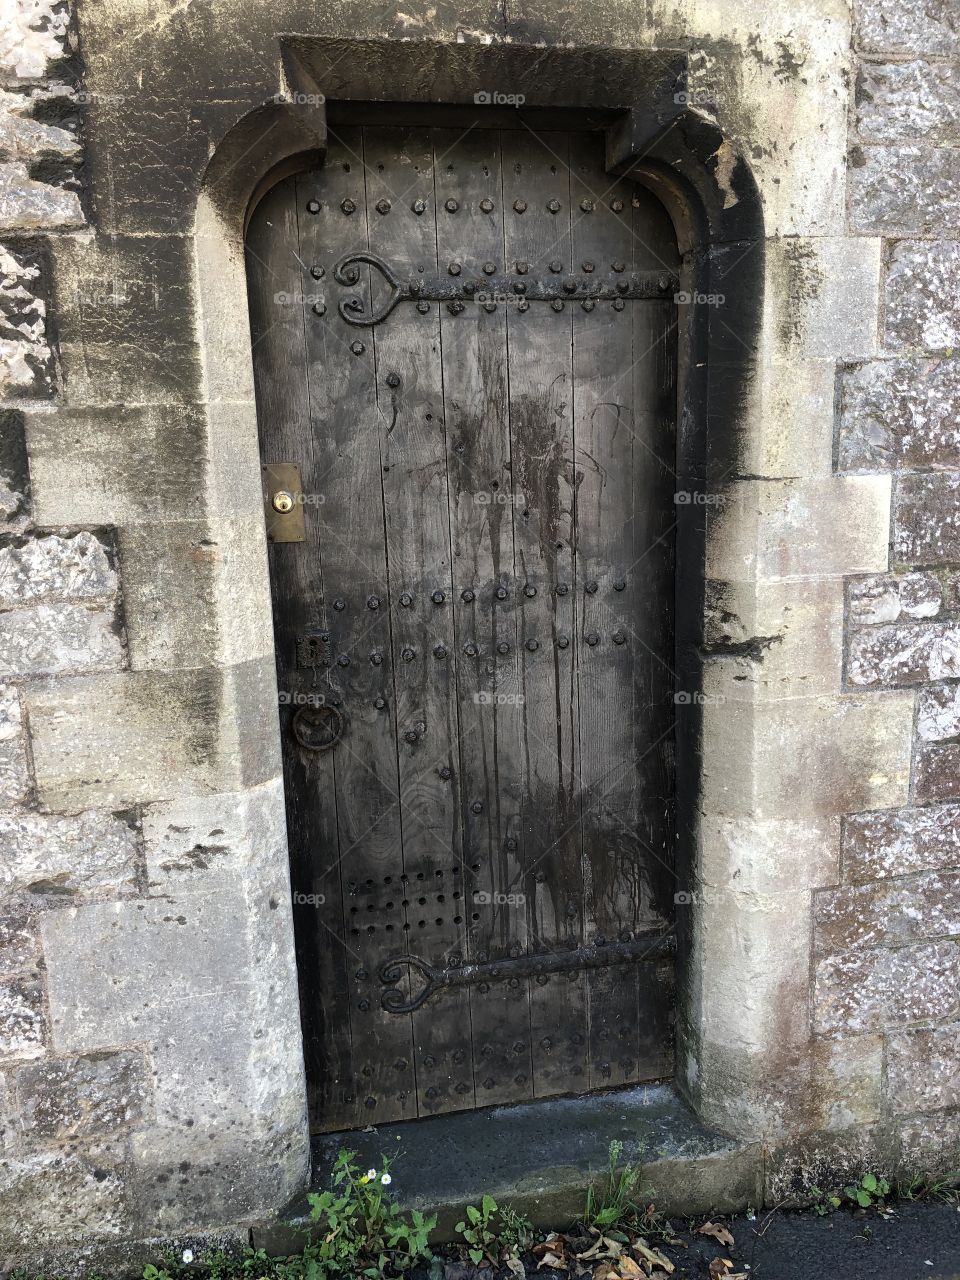 This is one of the doors of All Saints Church, that you couldn’t buy online or in the shops, its presence is both unique and impressive.